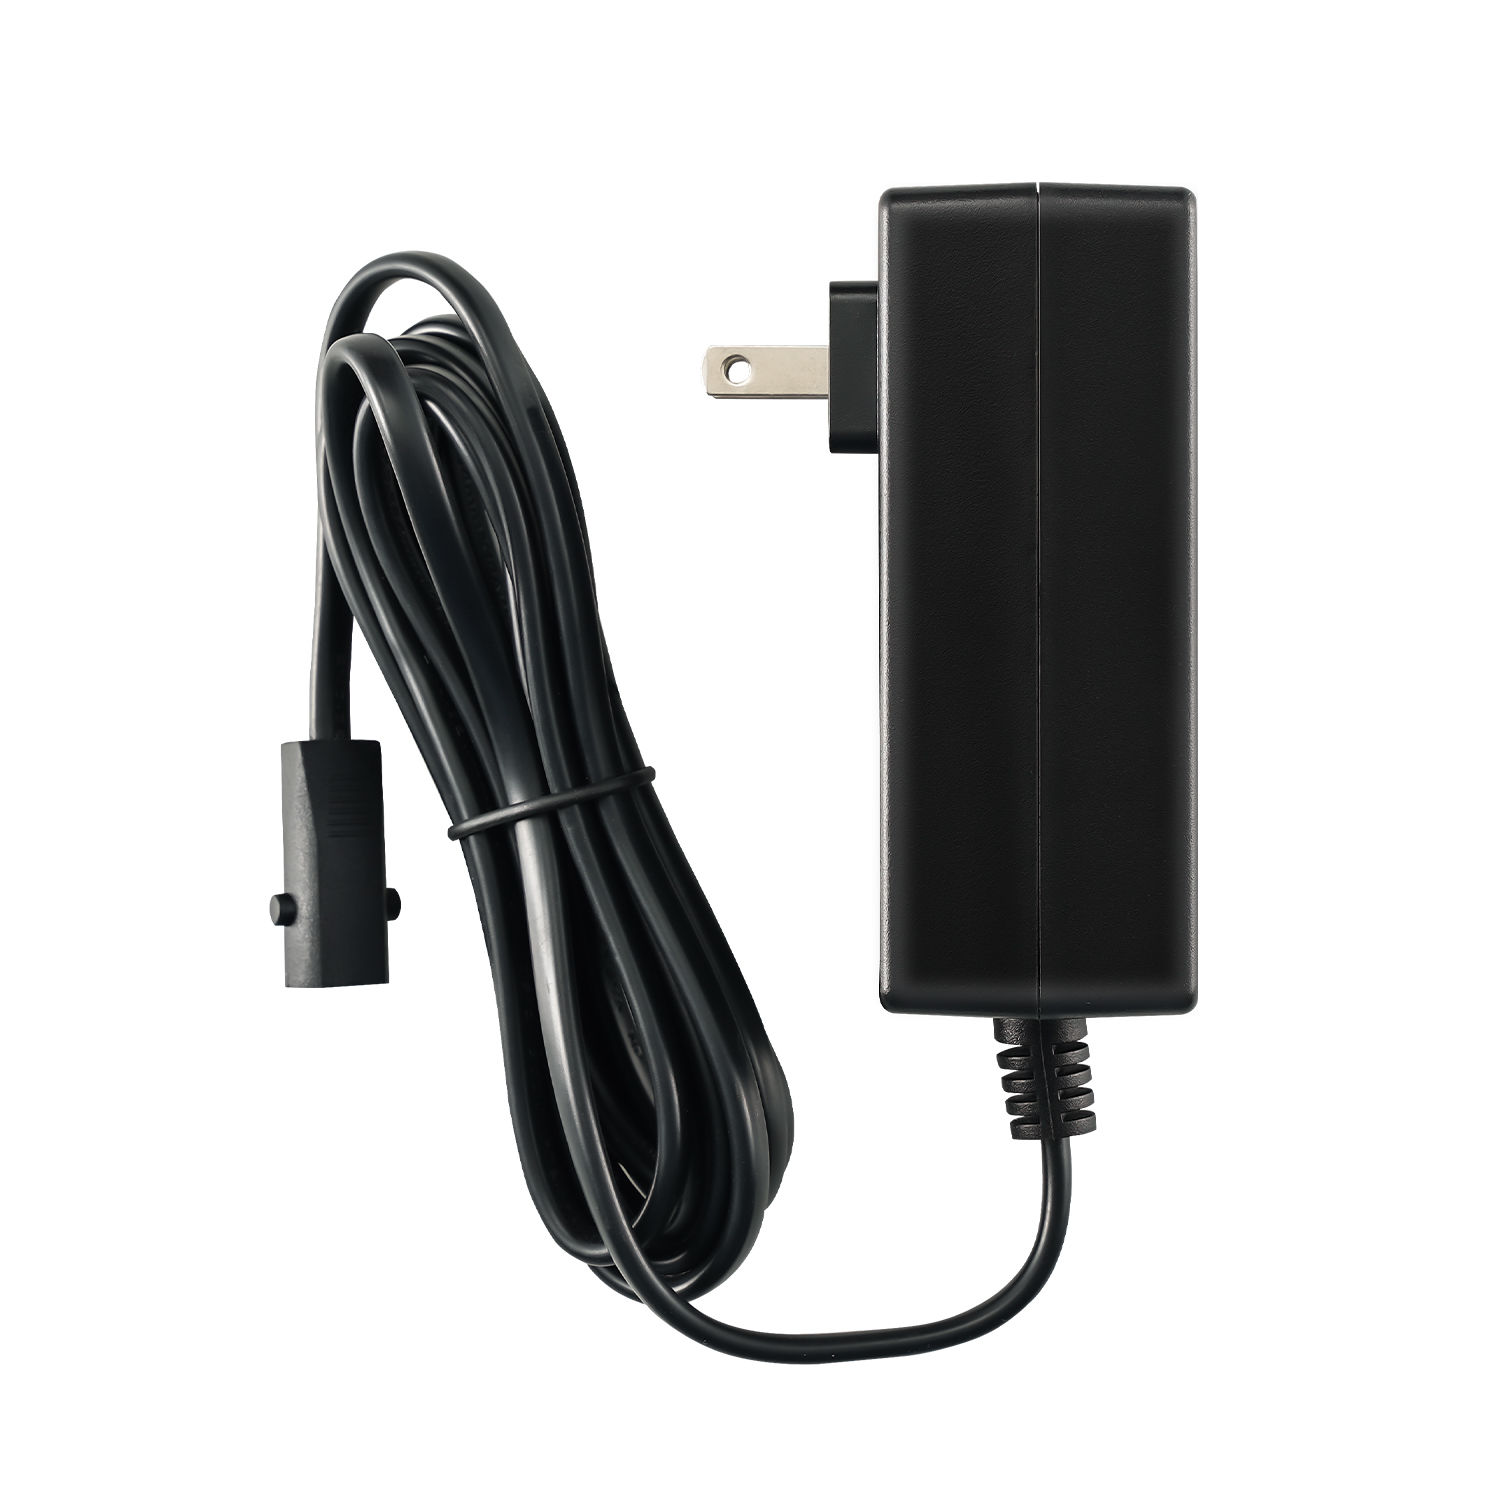 TOPSKY AC Adapter for Ceiling TV Mount TV01.01